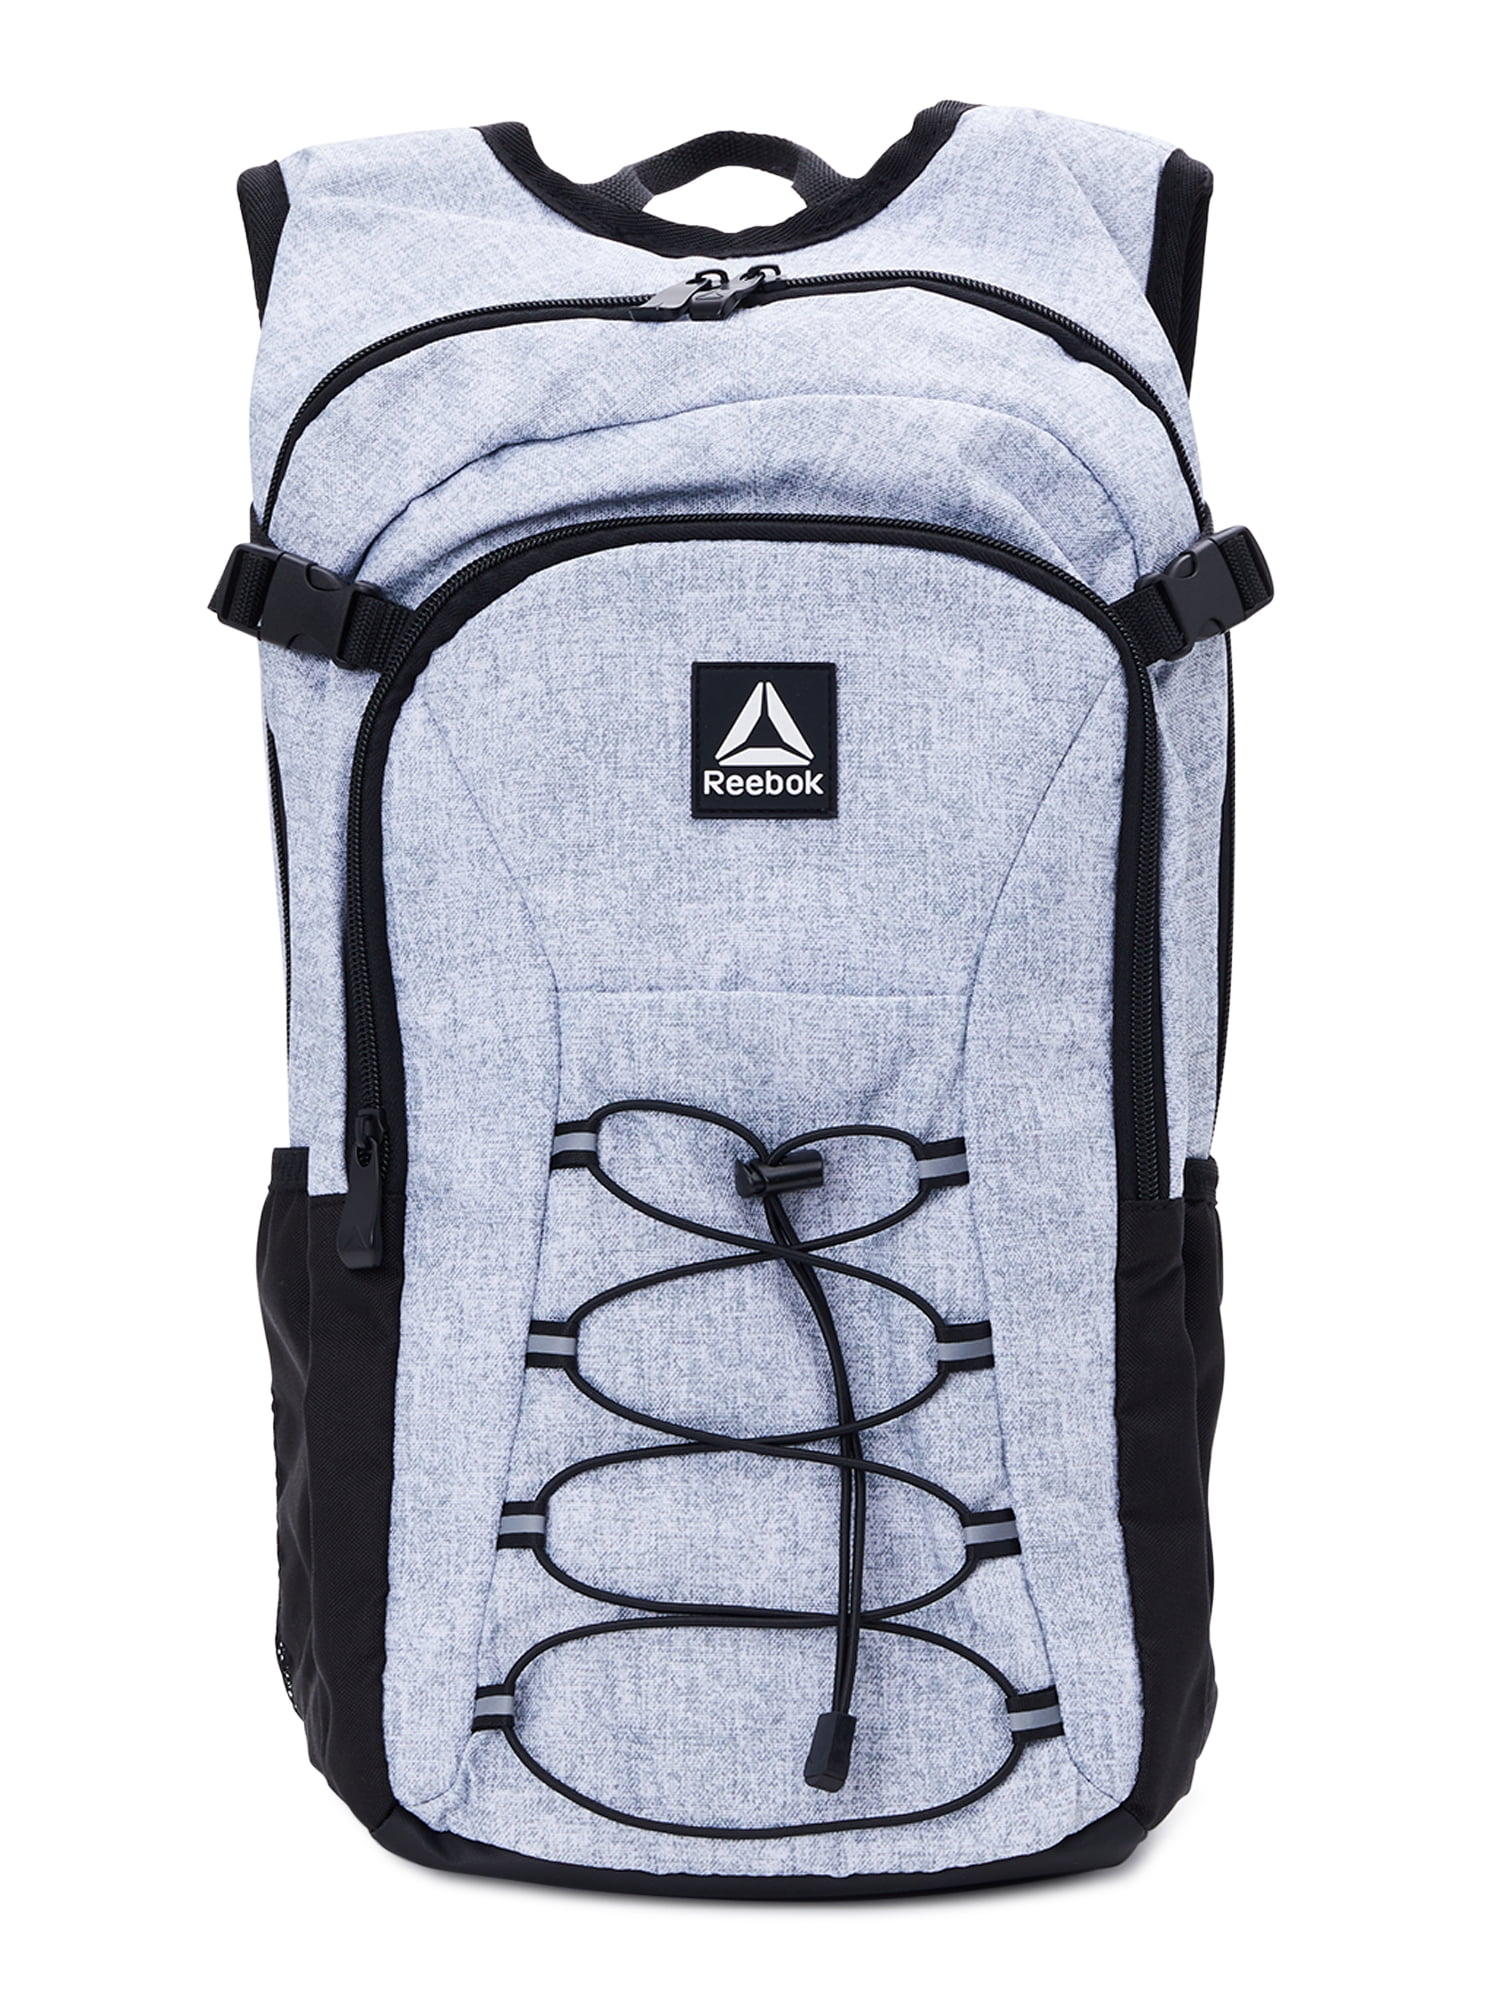 Reebok CrossFit Day Backpack 2019 Review